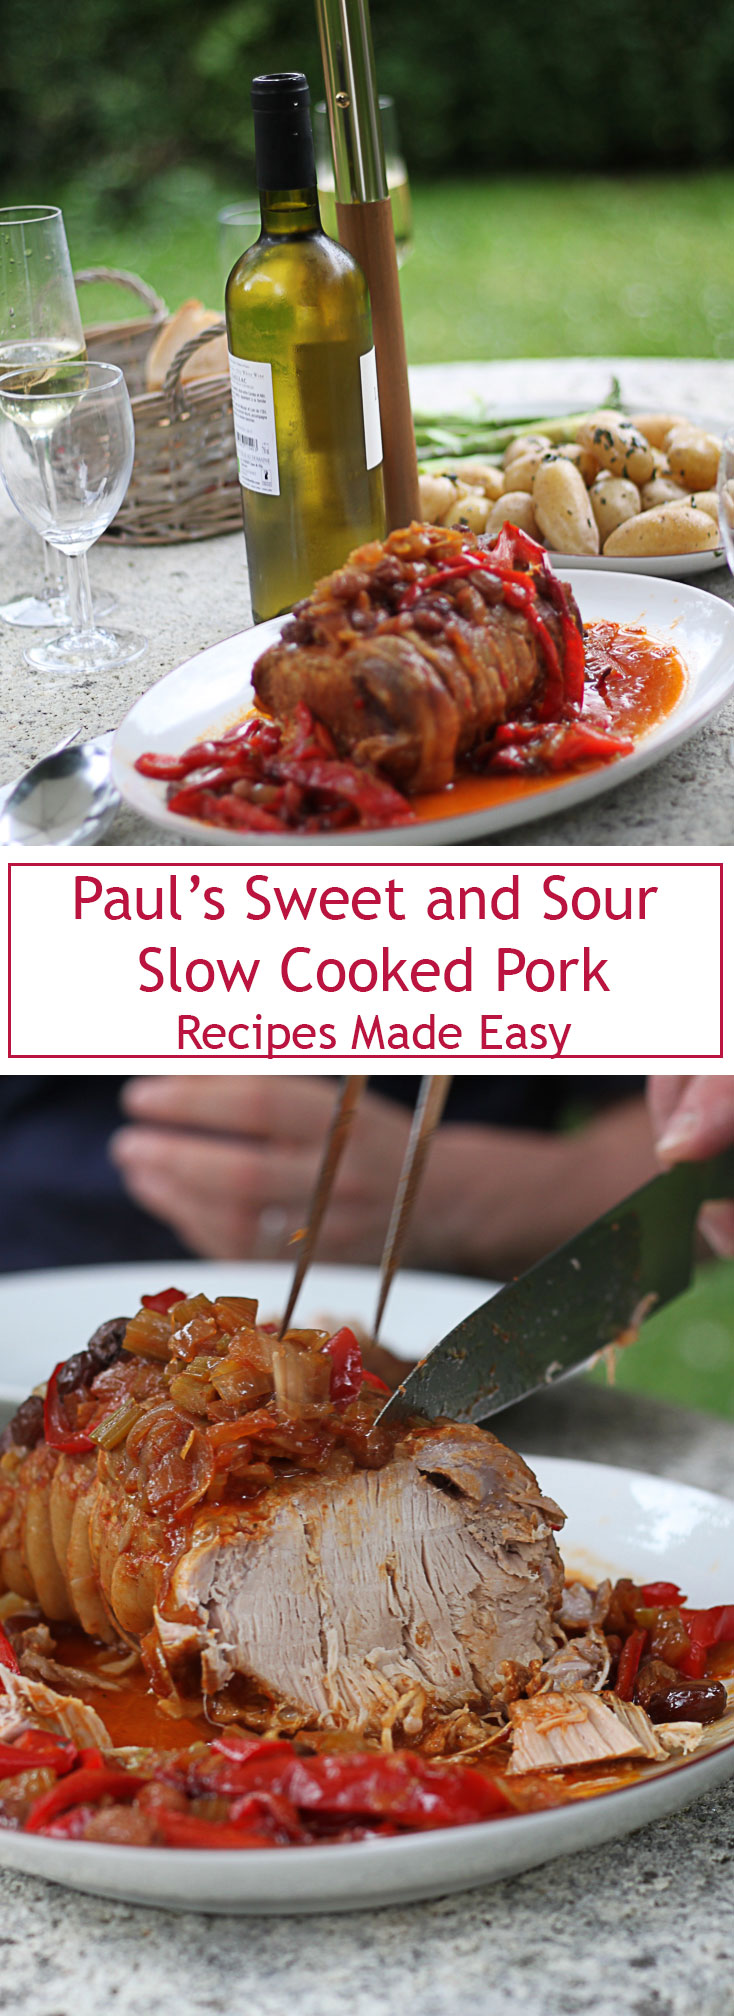 Paul's sweet and sour slow cooked pork 